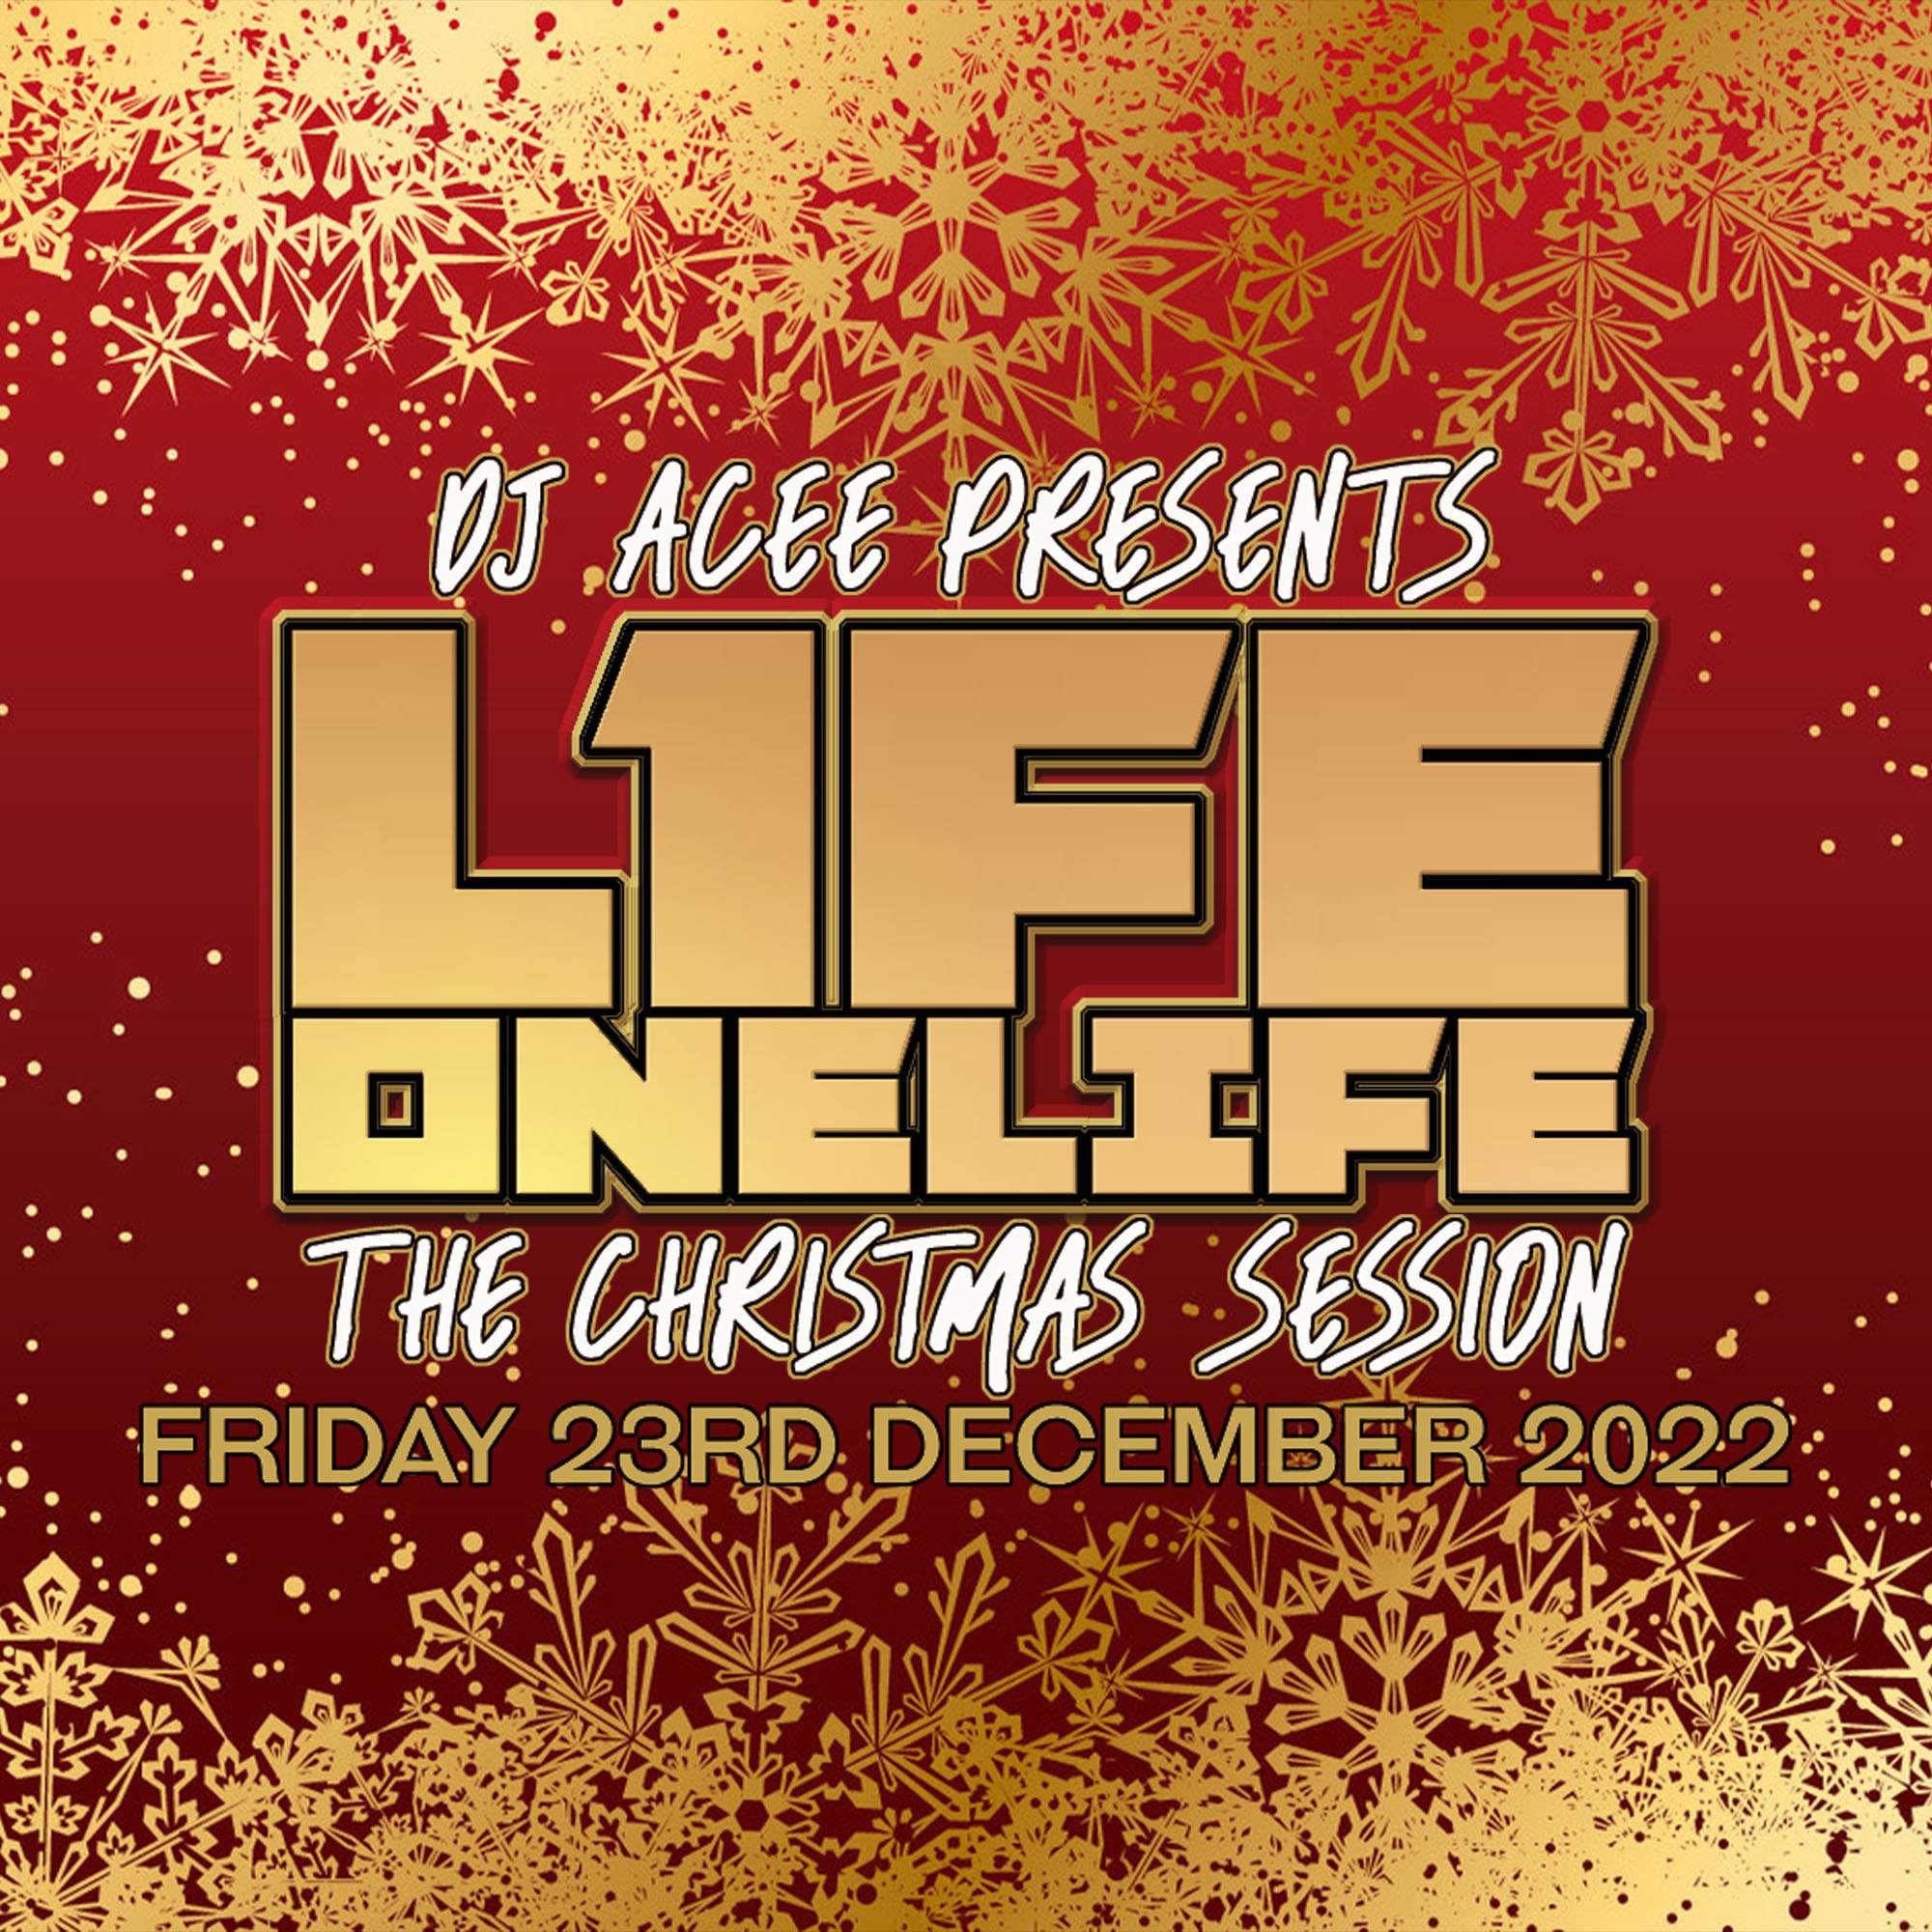 ONE L1FE THE CHRISTMAS SESSION - フライヤー表